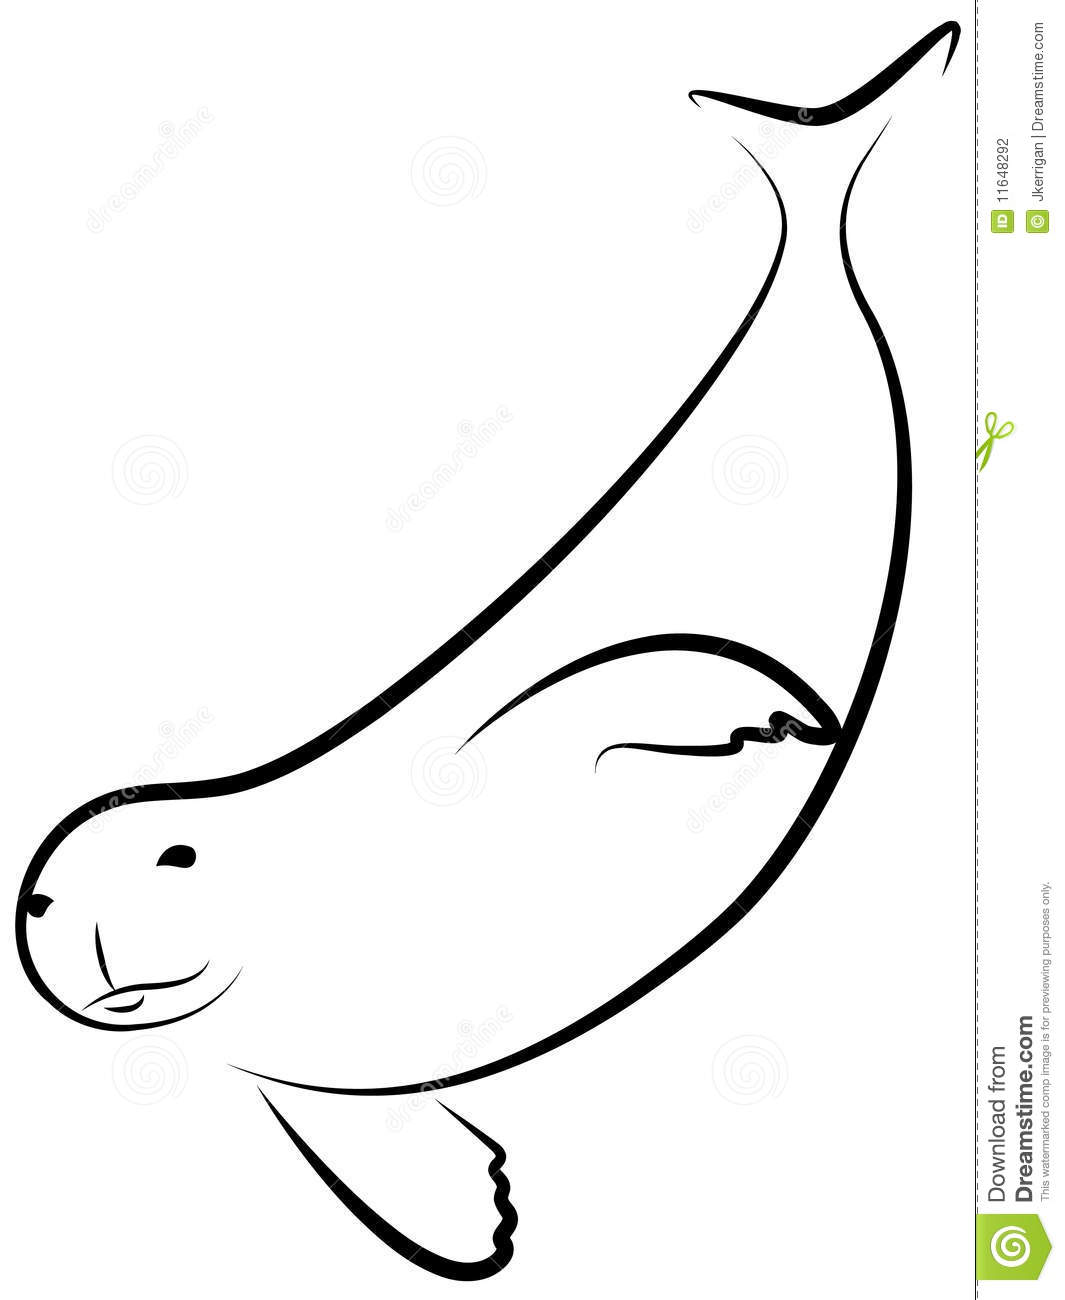 Seal Clip Art Black And White   Clipart Panda   Free Clipart Images